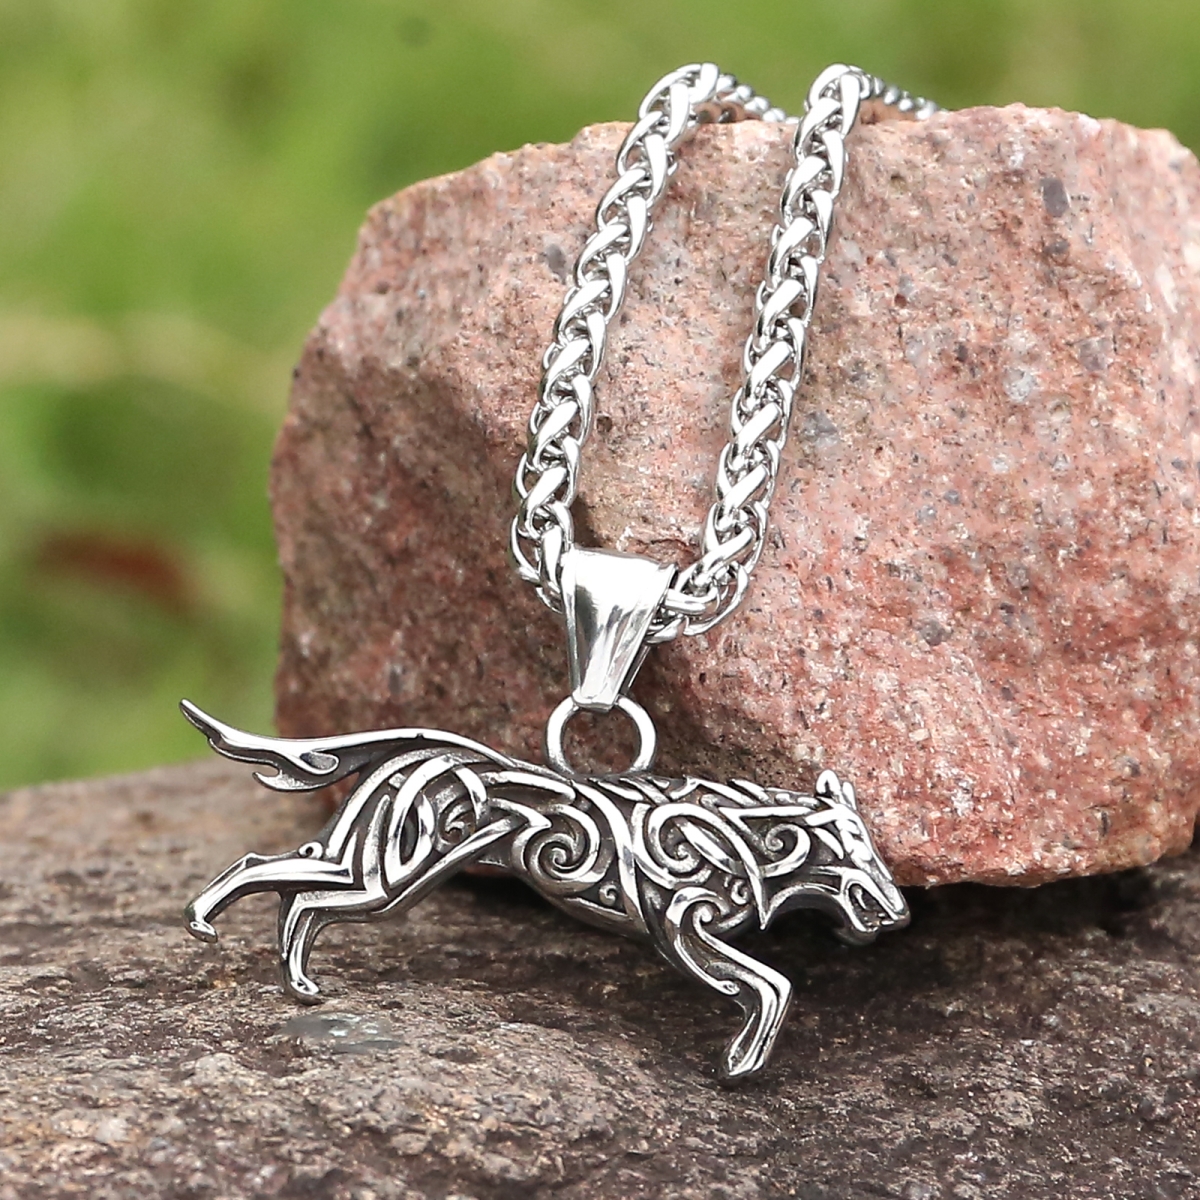 Viking Wolf Necklace US$2.9/PC-NORSECOLLECTION- Viking Jewelry,Viking Necklace,Viking Bracelet,Viking Rings,Viking Mugs,Viking Accessories,Viking Crafts